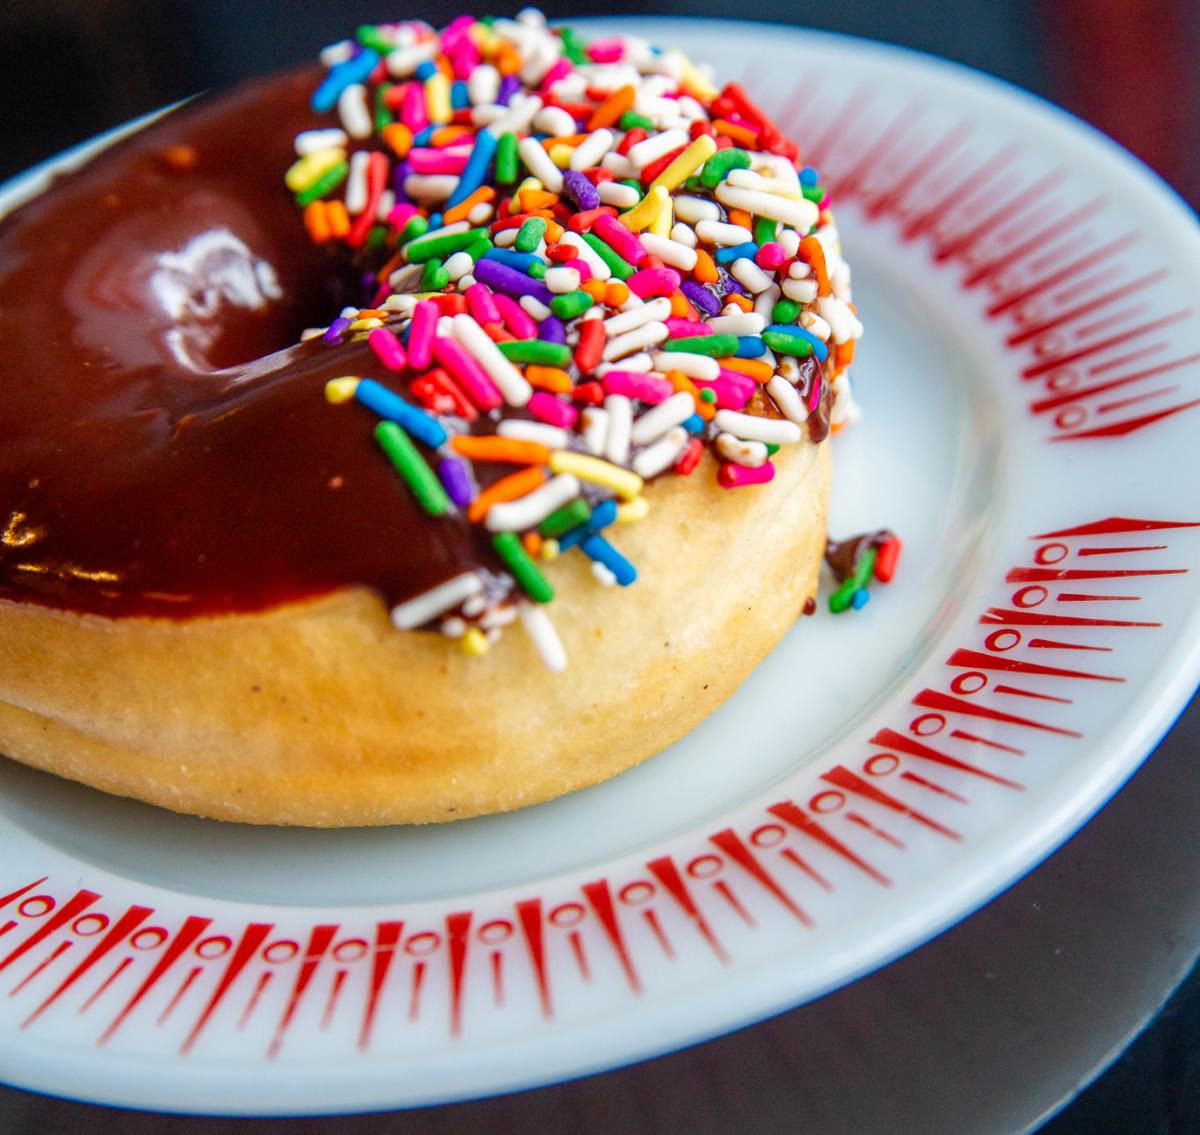 Chocolate frosted donut with sprinkles from Glory Doughnuts 